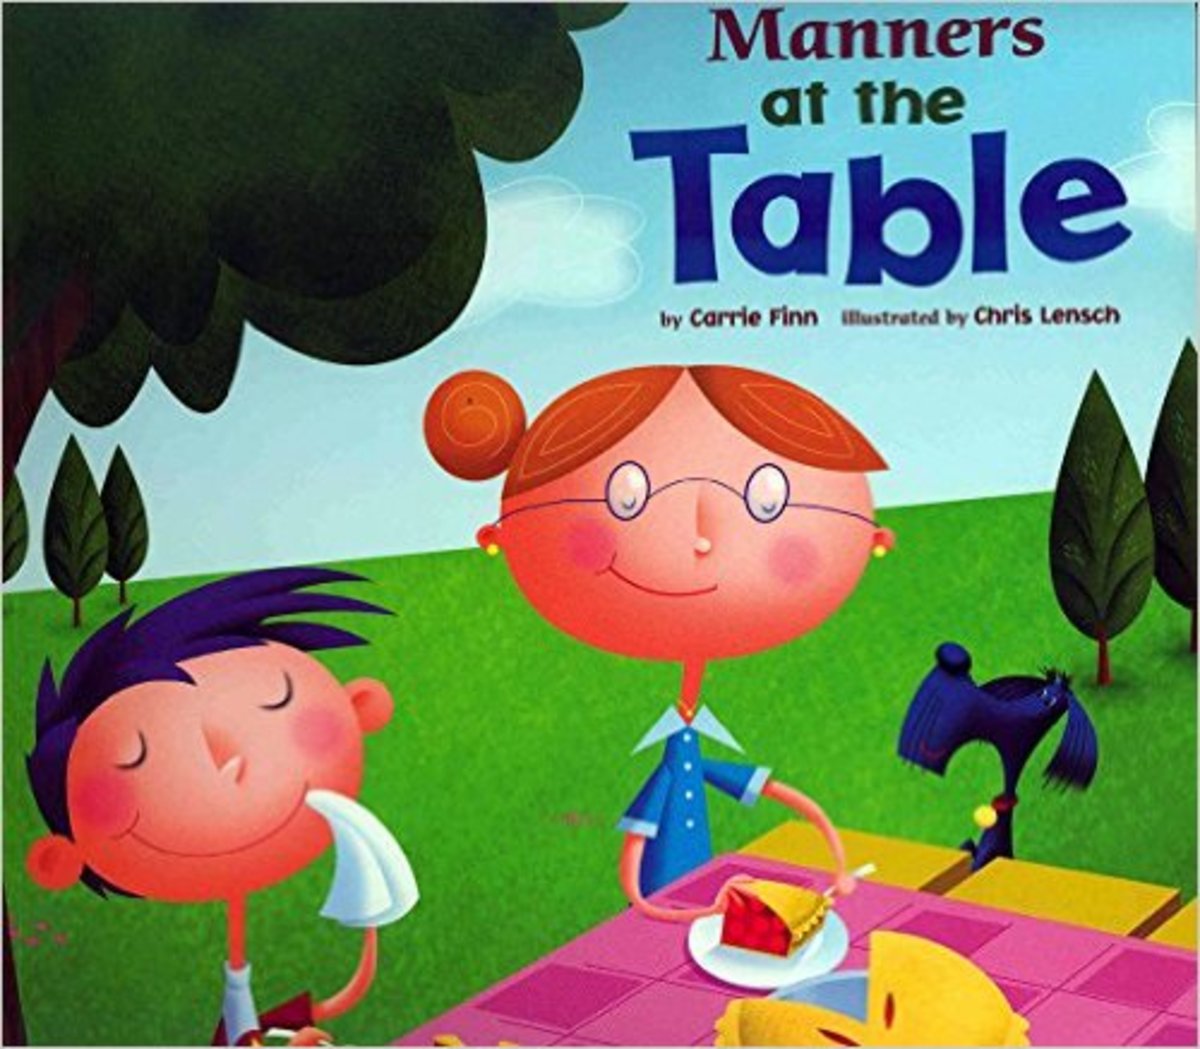 Manners at the Table (Way To Be!: Manners) by Carrie Finn